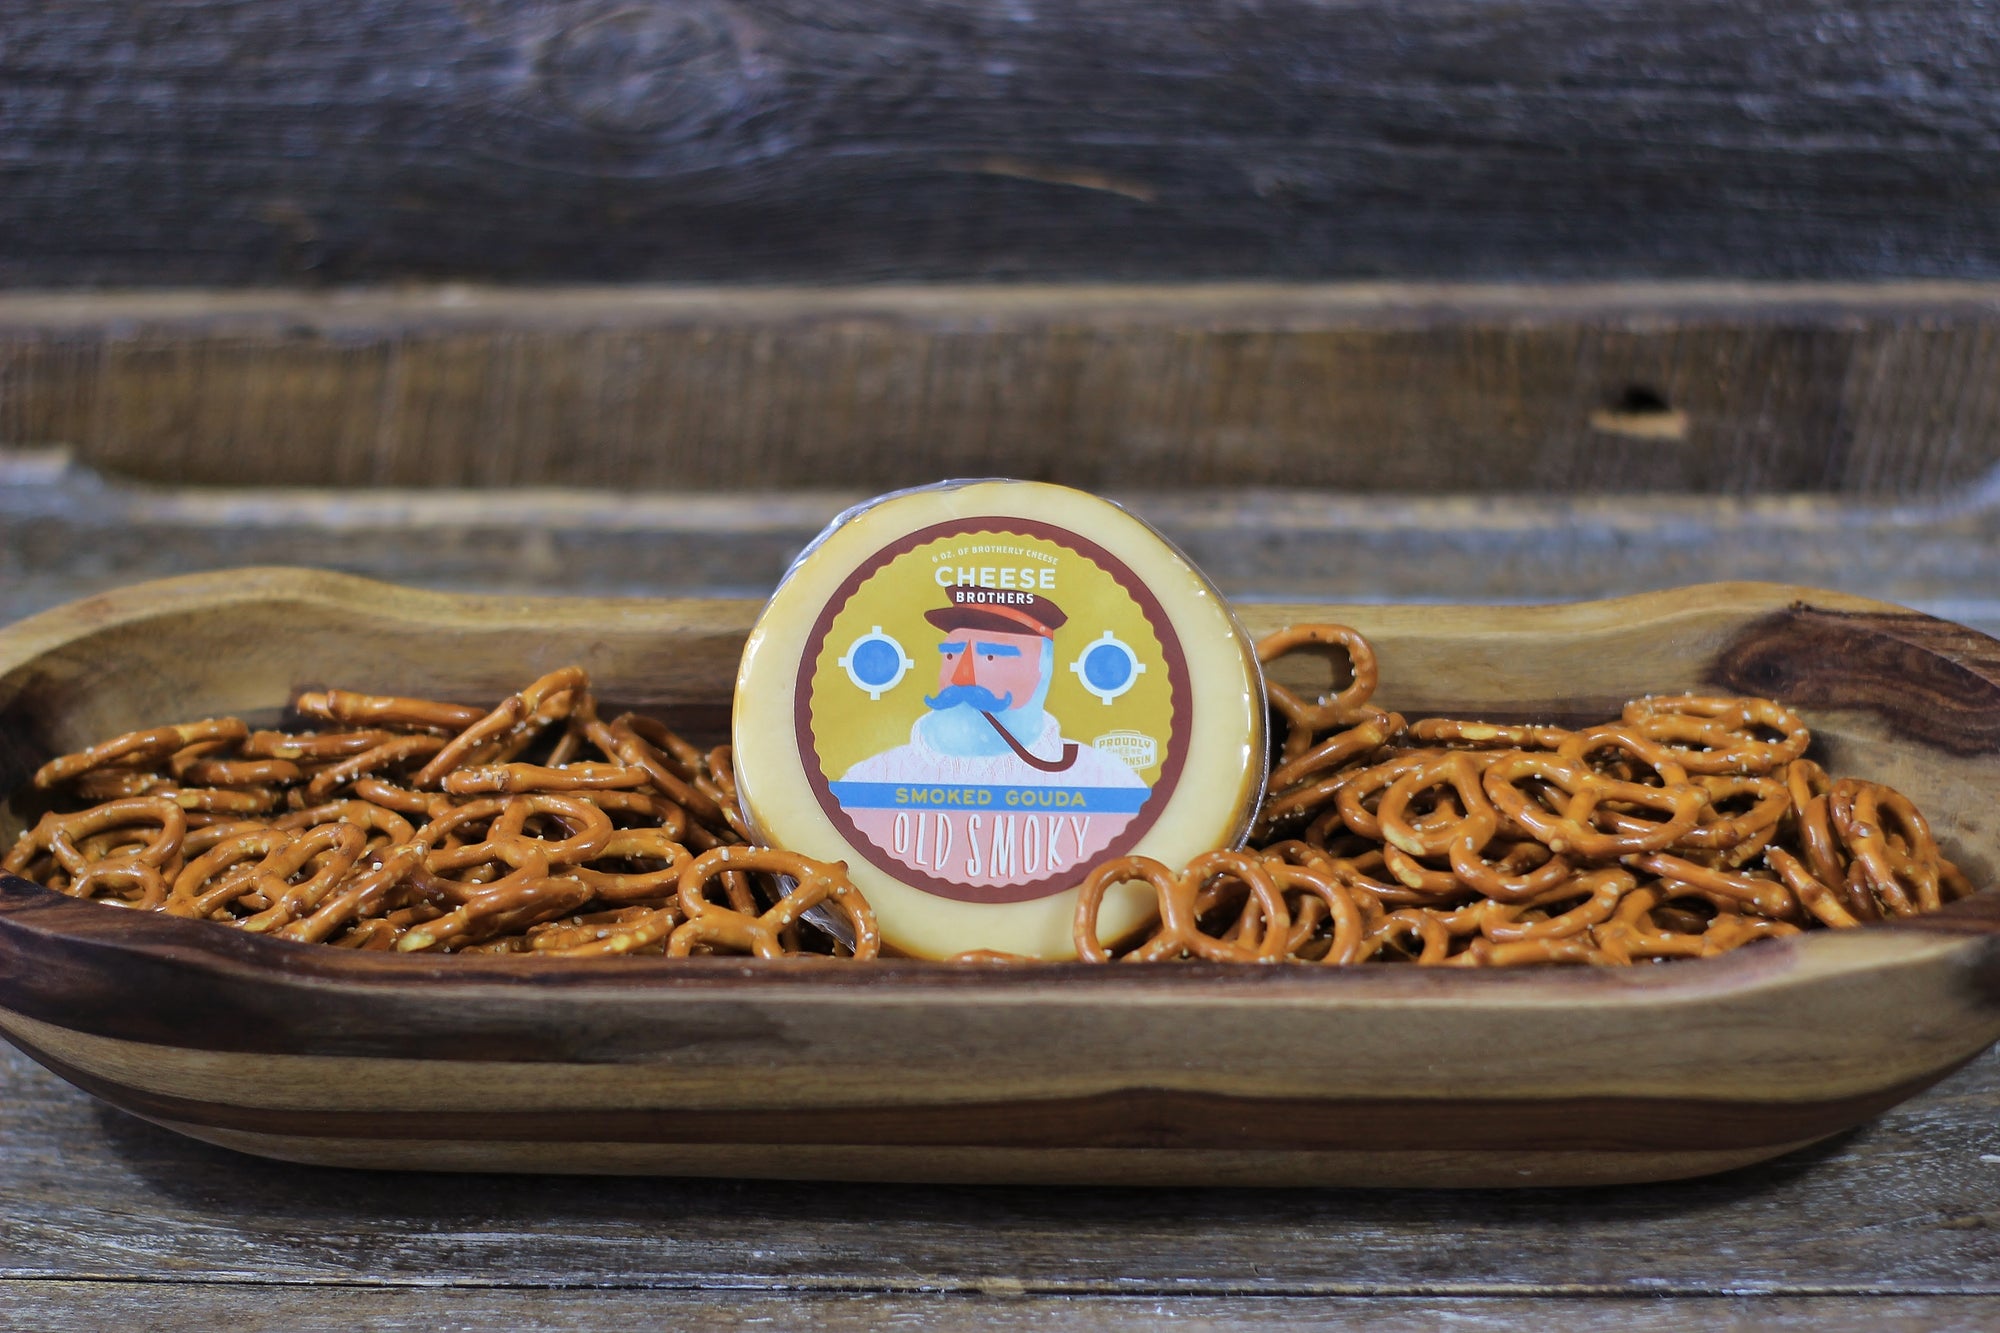 Package of Old Smoky artisan smoked gouda in a bowl of pretzels. 